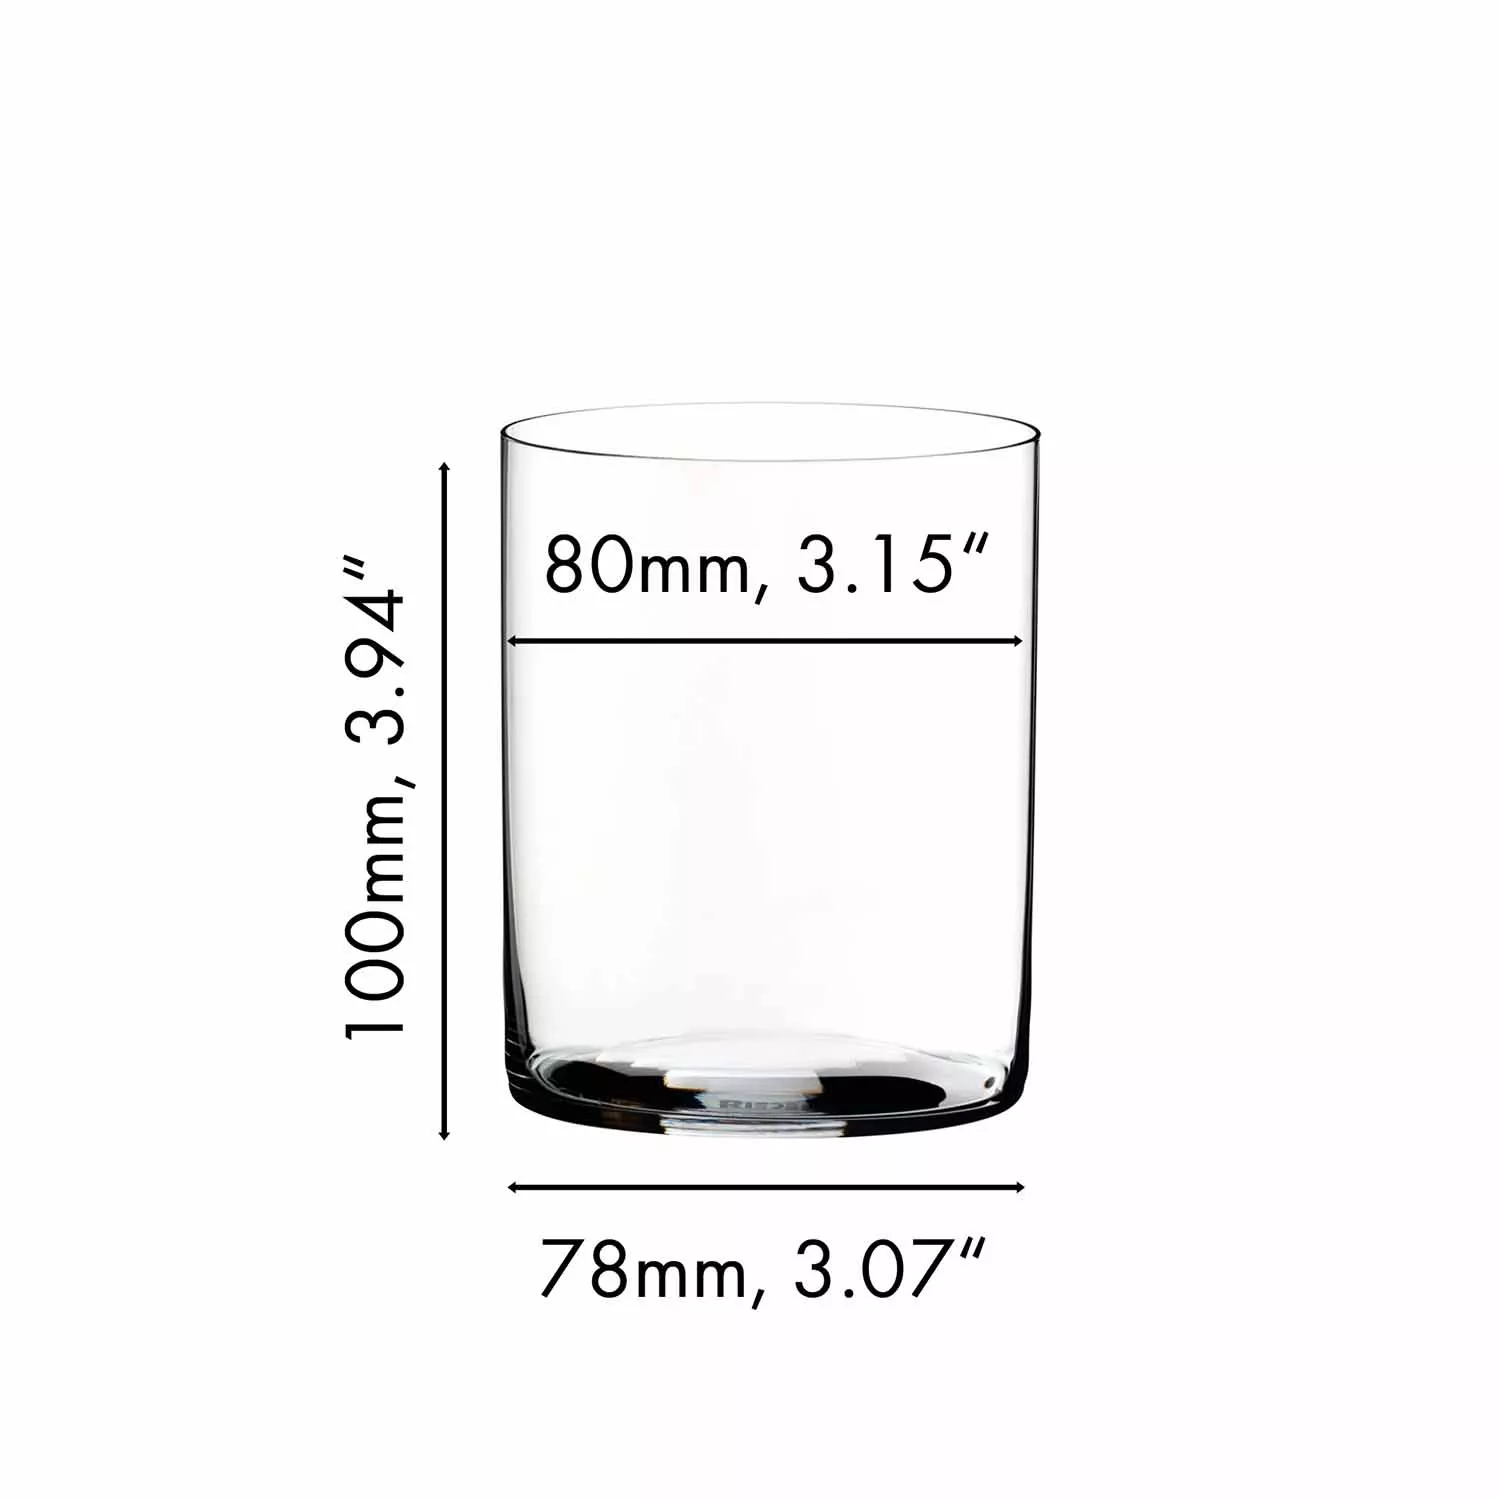 RIEDEL Veloce Water Glass, Set of 2